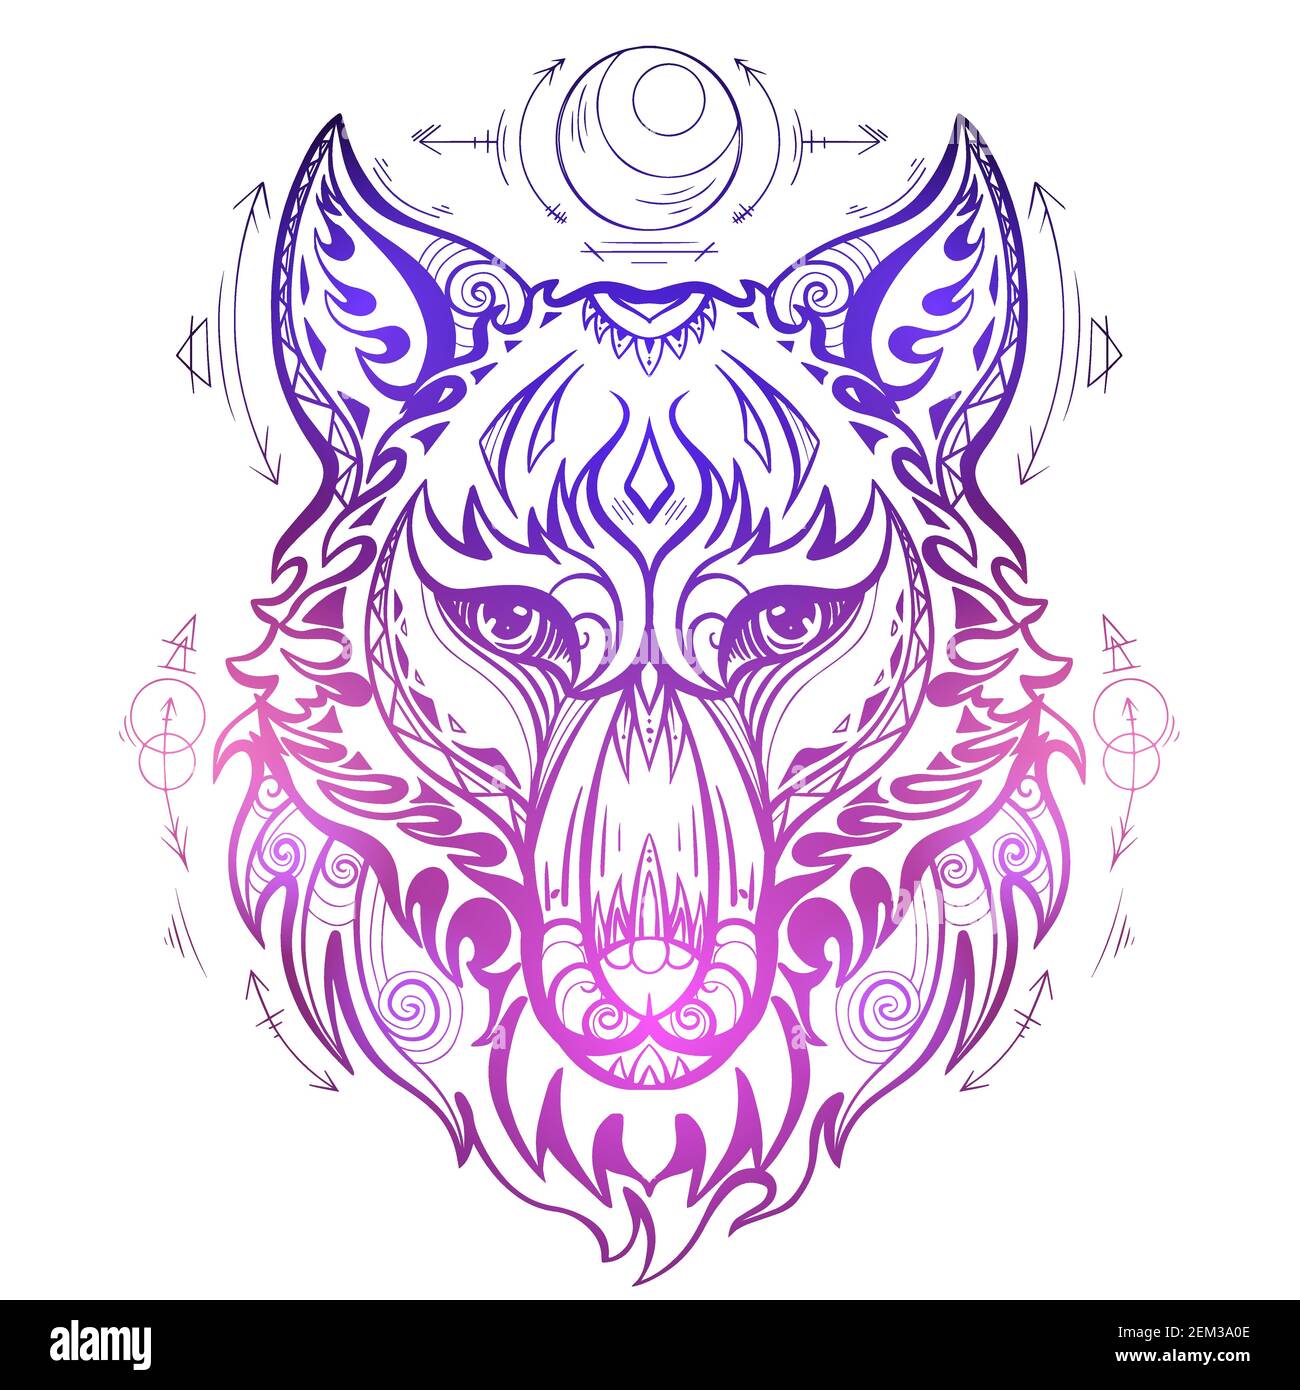 Neon wolf head front view with ethnic decorations and spiritual symbols of the moon and arrows. Predator front view portrait with curls and tribal orn Stock Vector